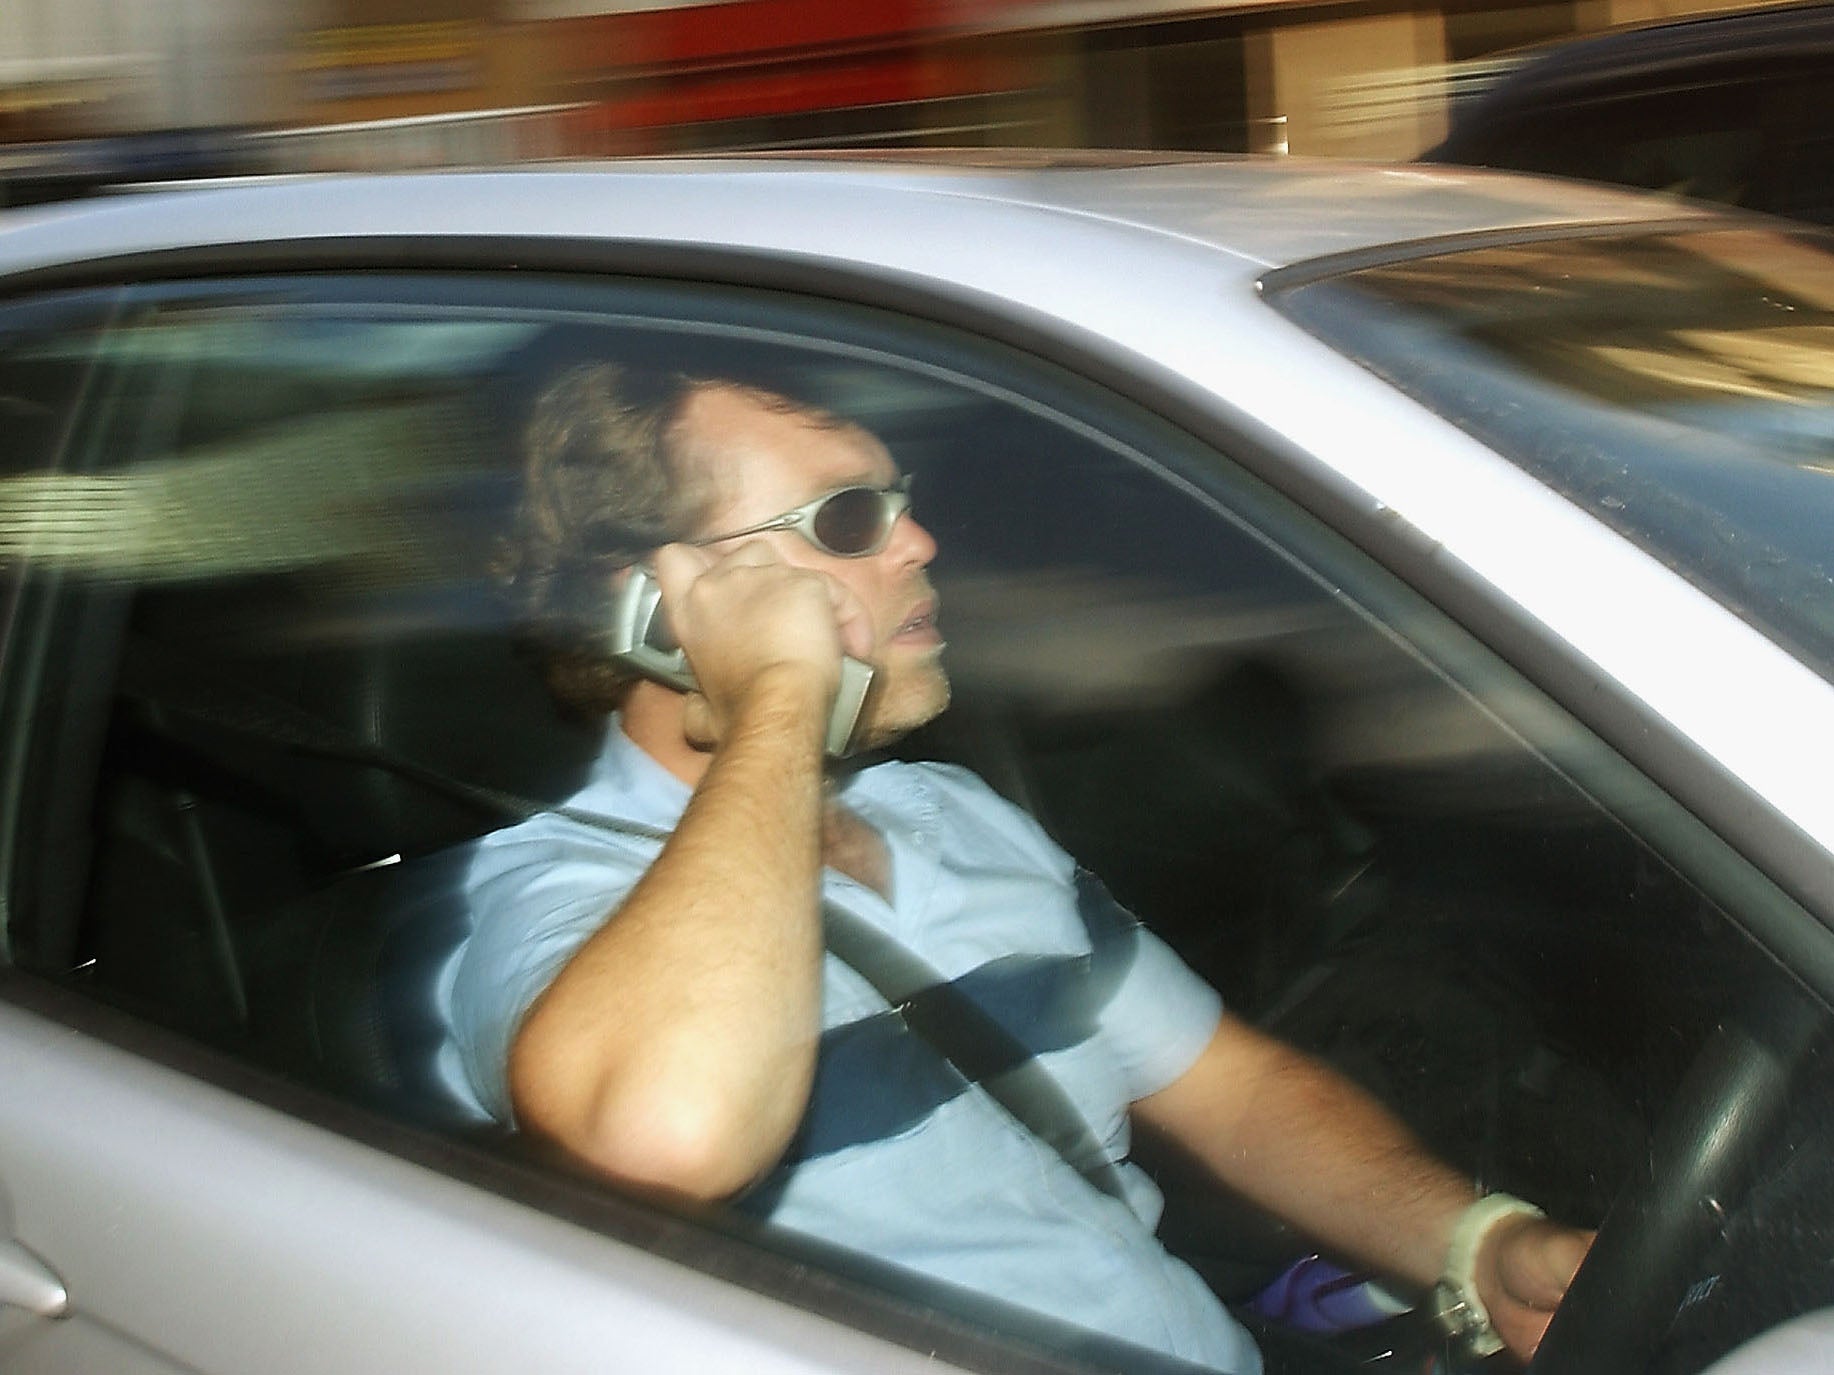 Police Catch Drivers An Hour Using Mobile Phones At The Wheel In